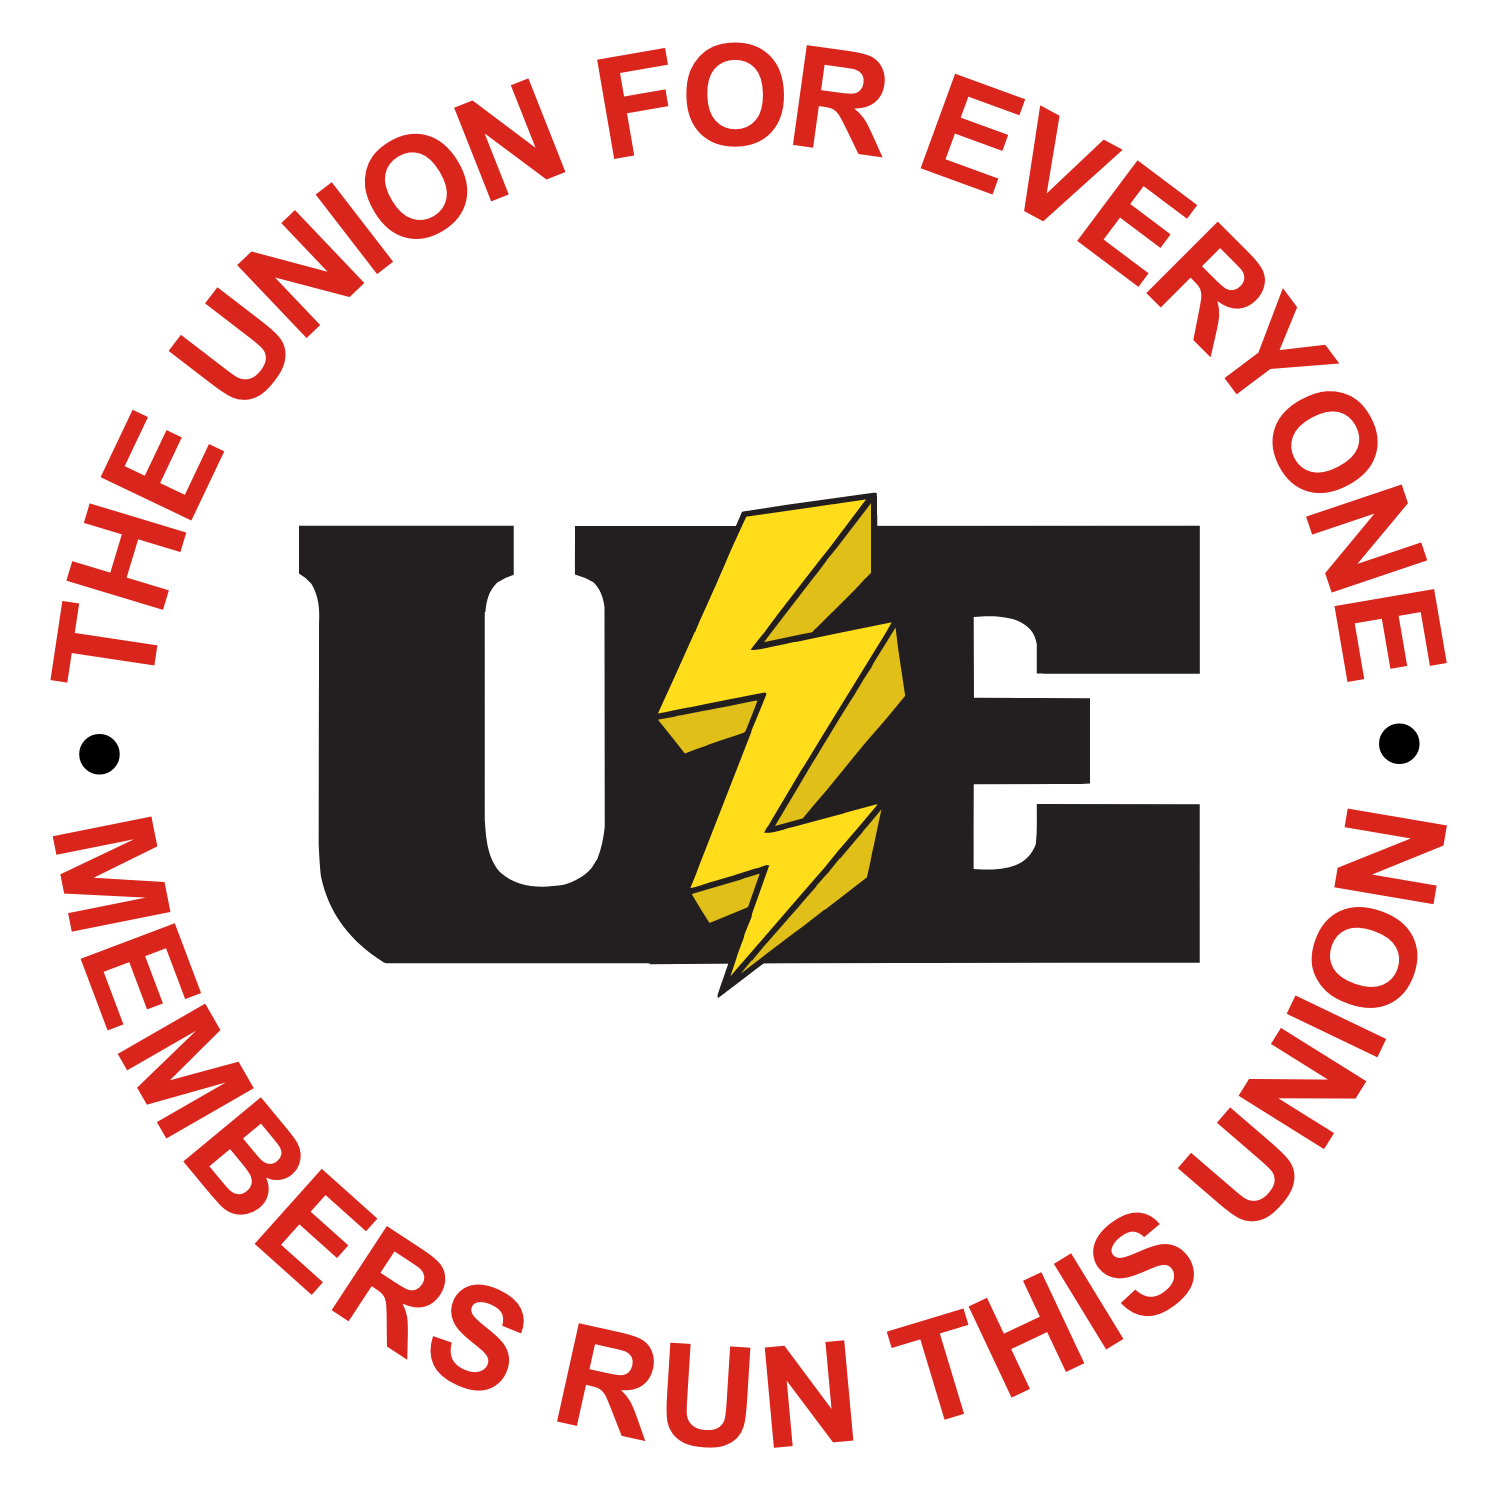 U E Logo inside of the text "The Union for Everyone. Members run this union."